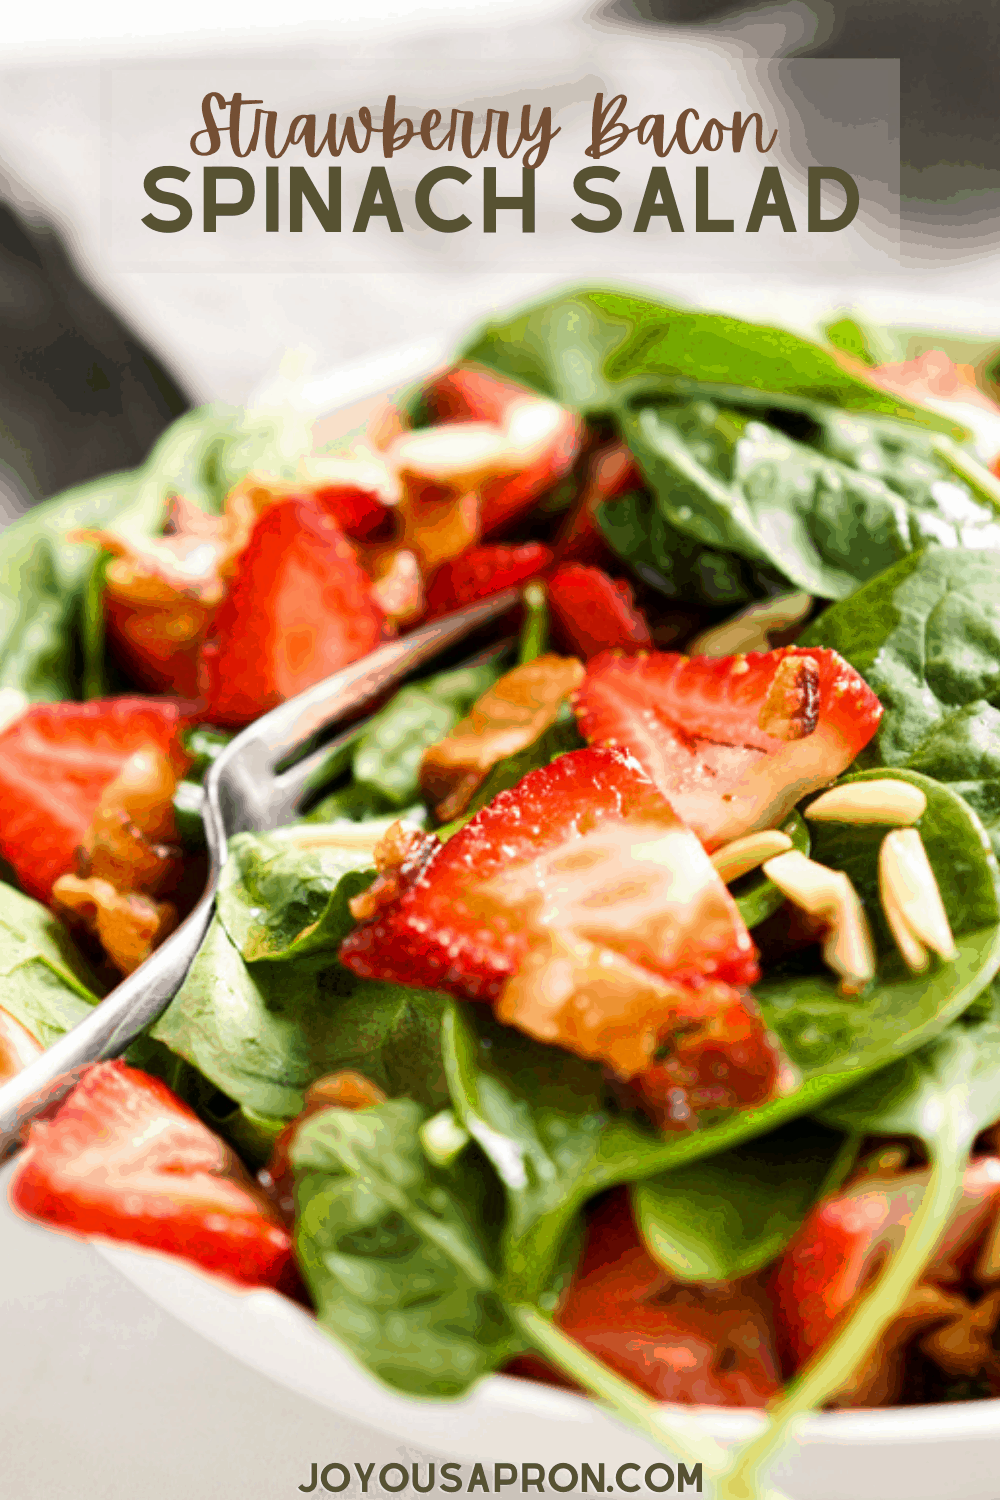 Strawberry Bacon Spinach Salad with Lemon Maple Dressing - healthy and easy salad for summer cookouts or dinners. A bed of fresh spinach topped with strawberries, bacon and slivered almonds, drizzled with a lovely, highly flavorful homemade lemon maple dressing. via @joyousapron